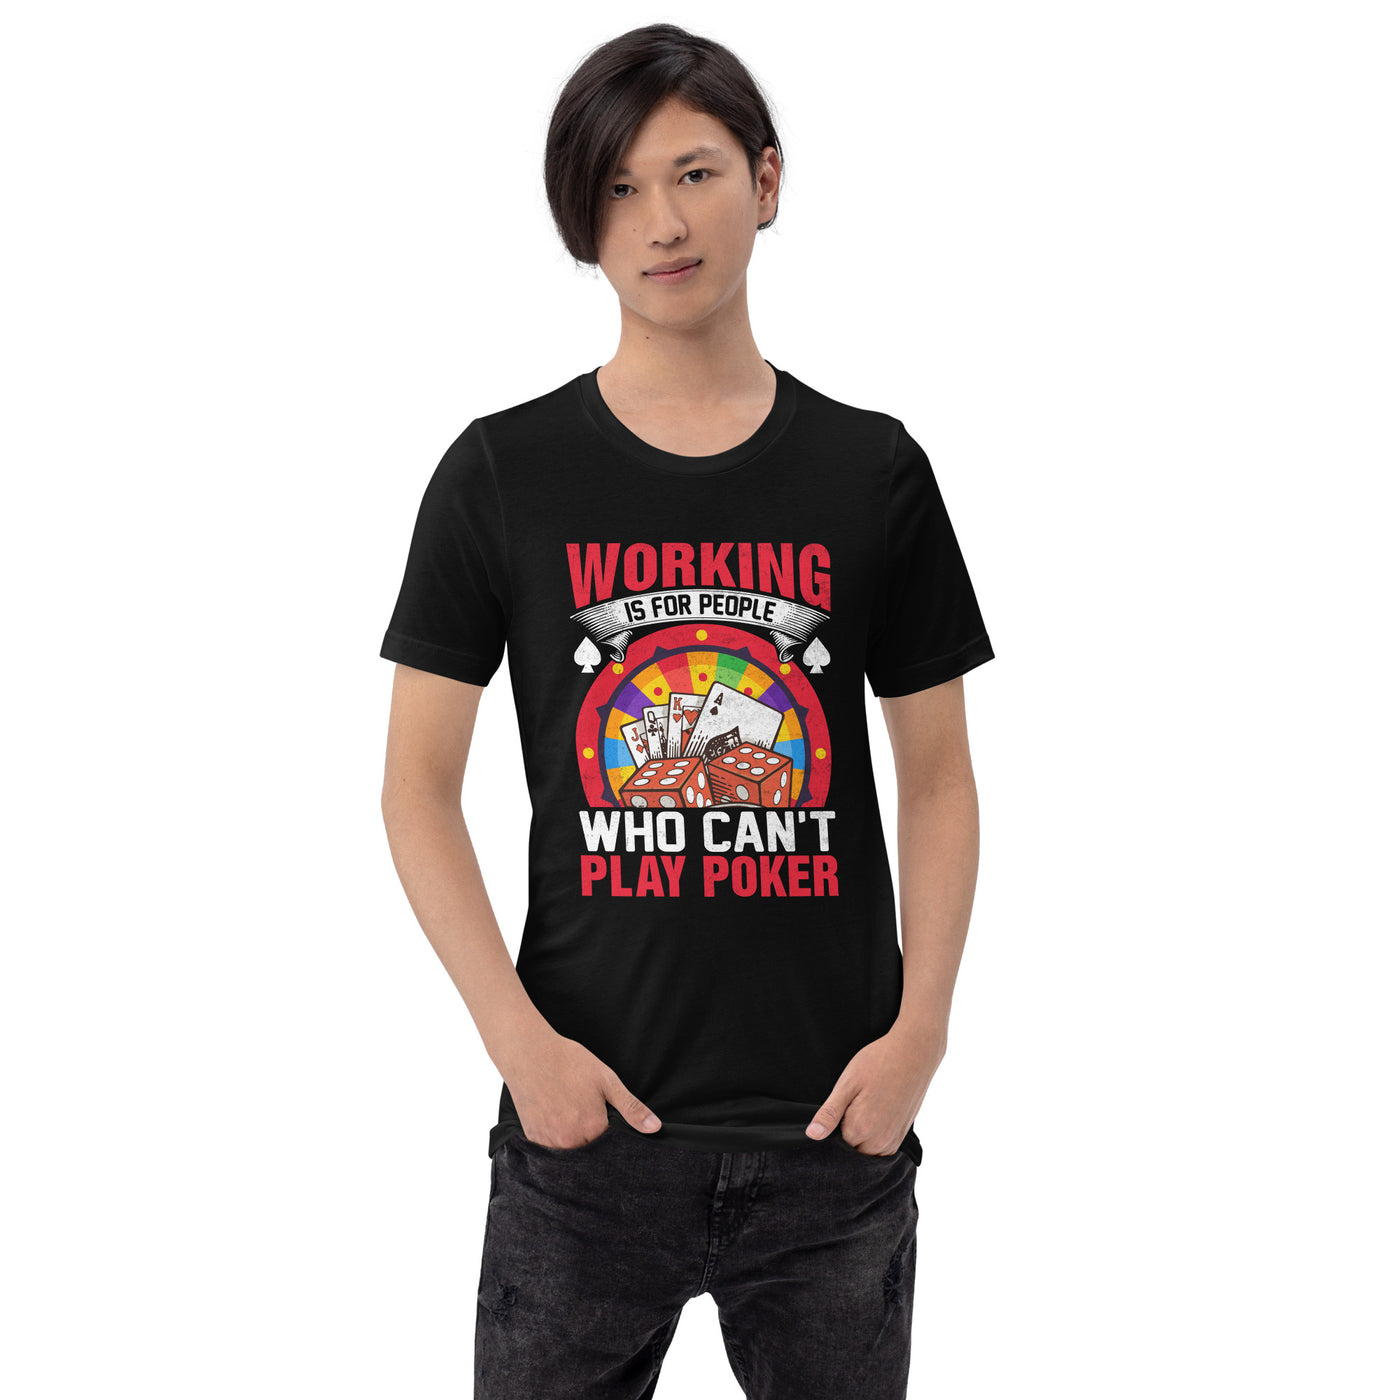 Working is for people for Who can't Play Poker - Unisex t-shirt